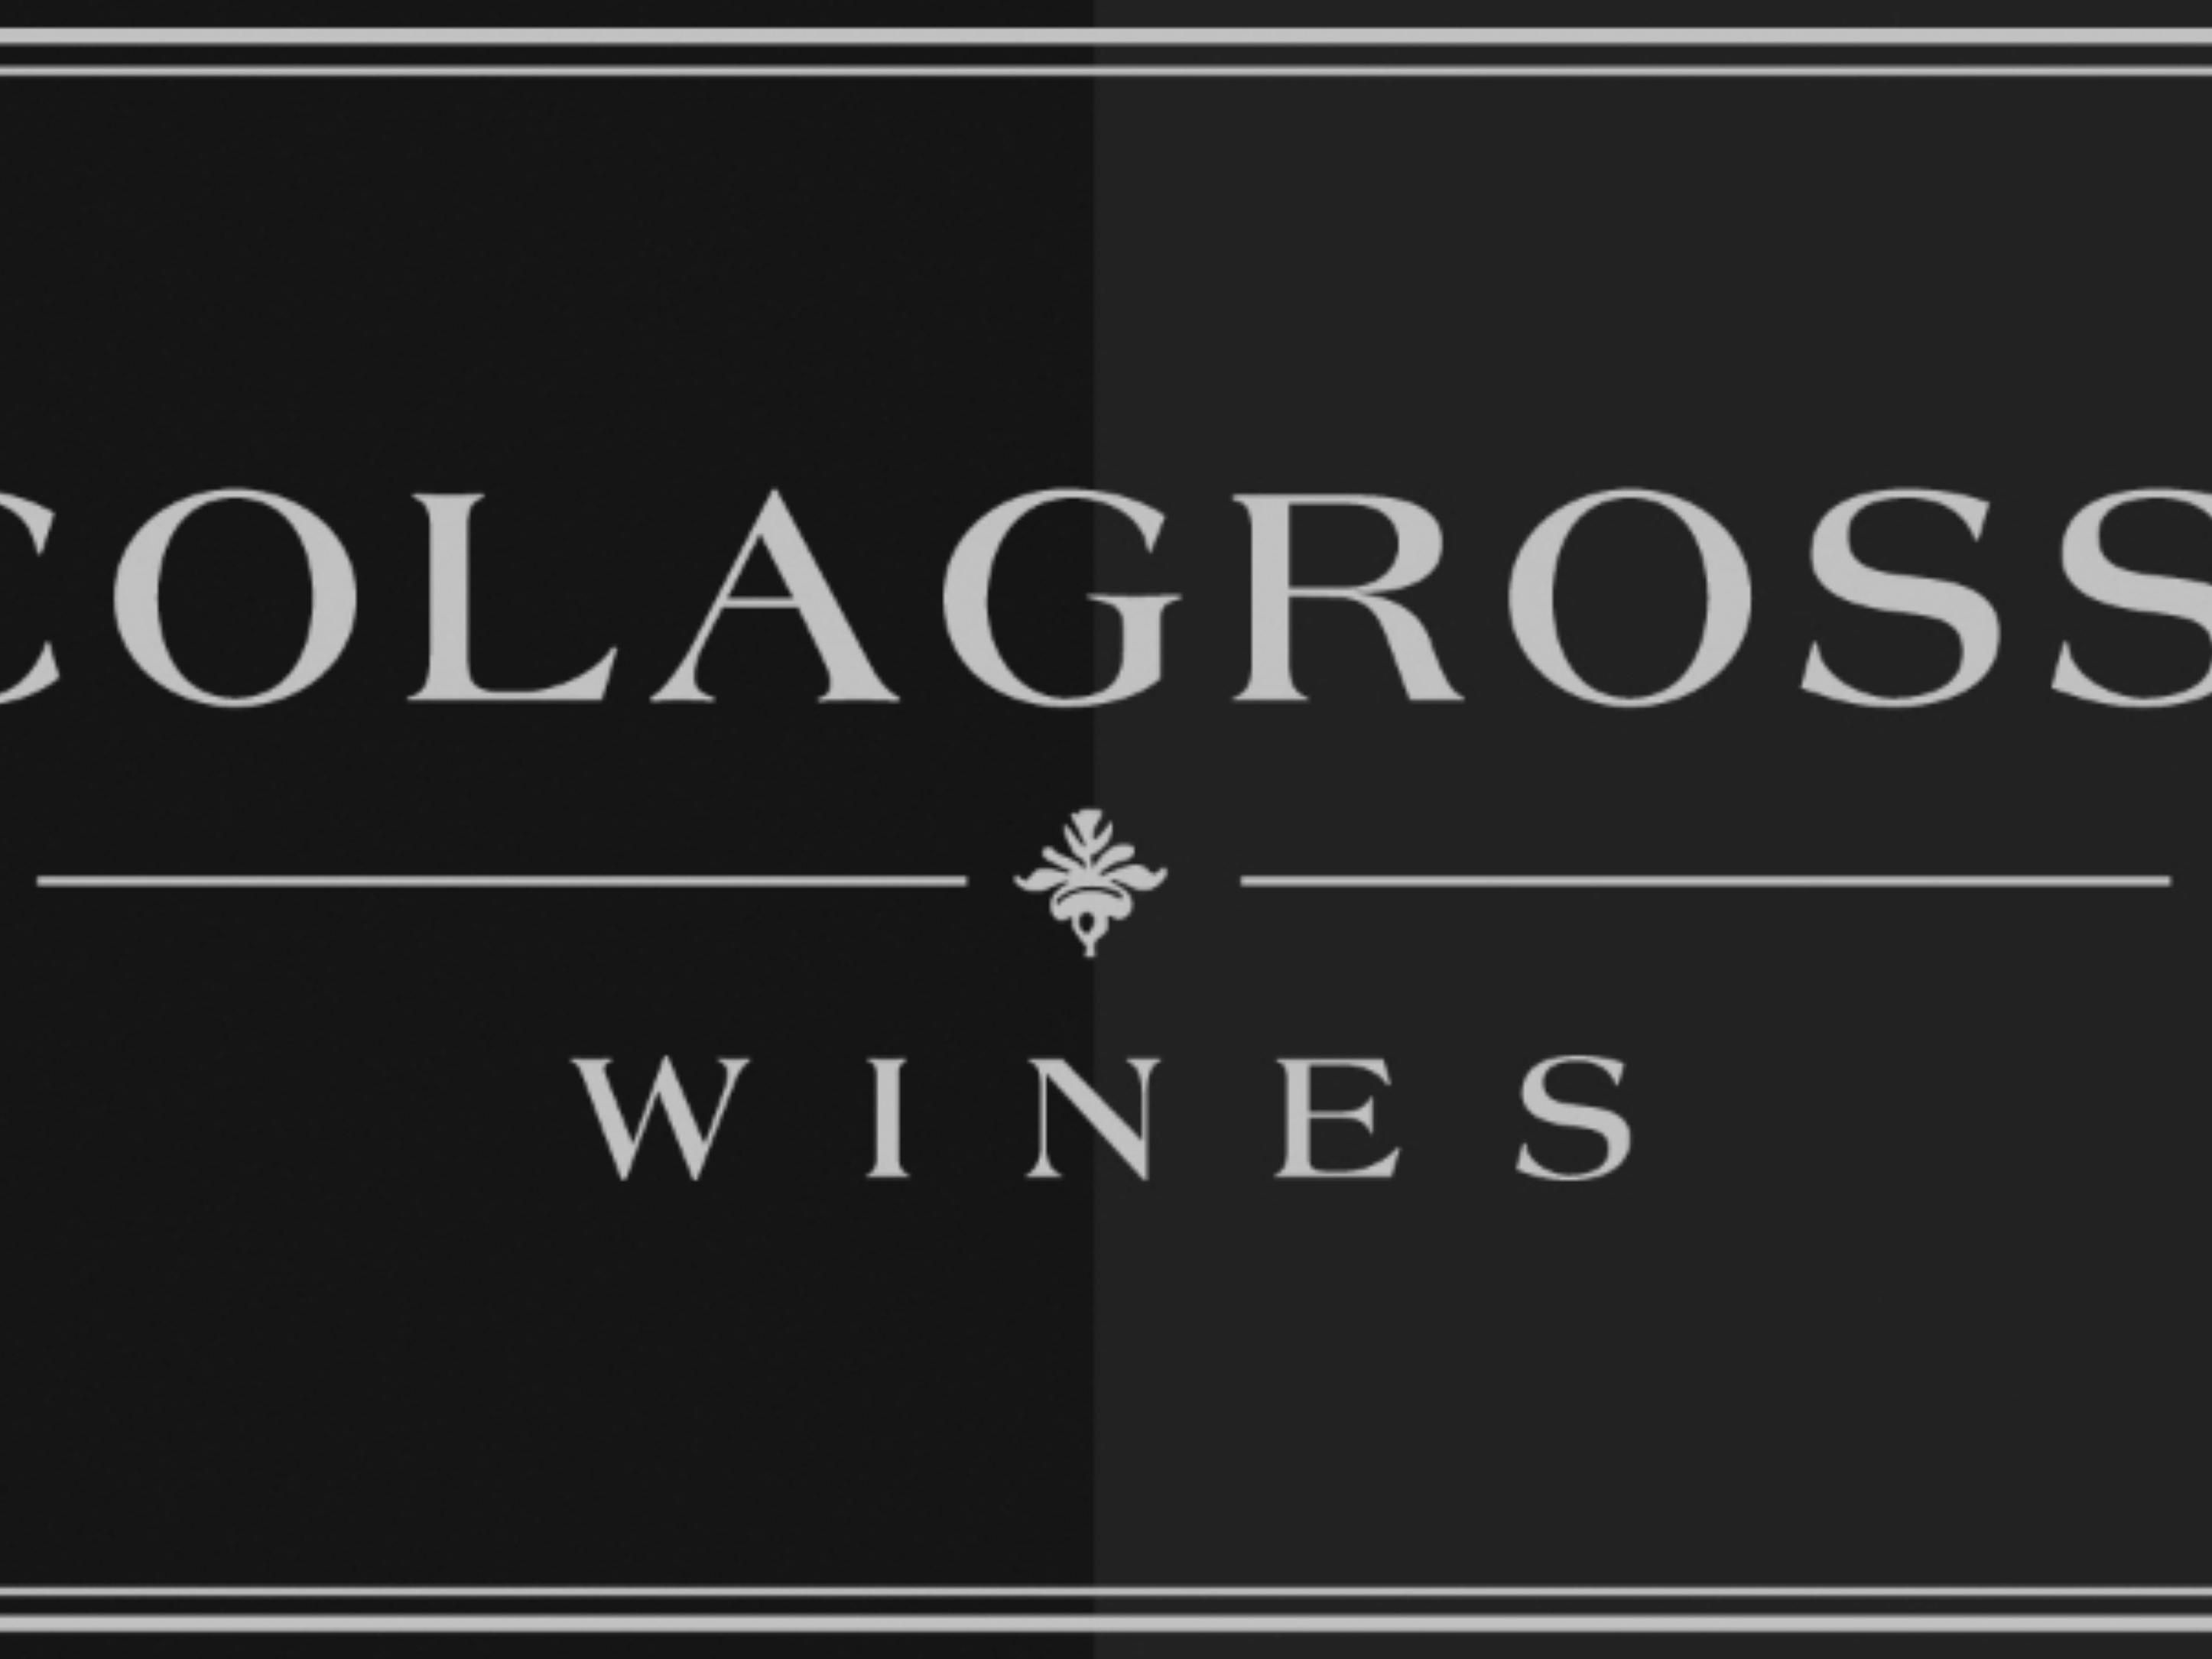 Just 1.8 miles from the hotel,  Colagrossi offers Italian Varietals in small batches with passion. 
707-529-5459 to set up tasting and check availability.  Tastings Fri, Sat & Sun.